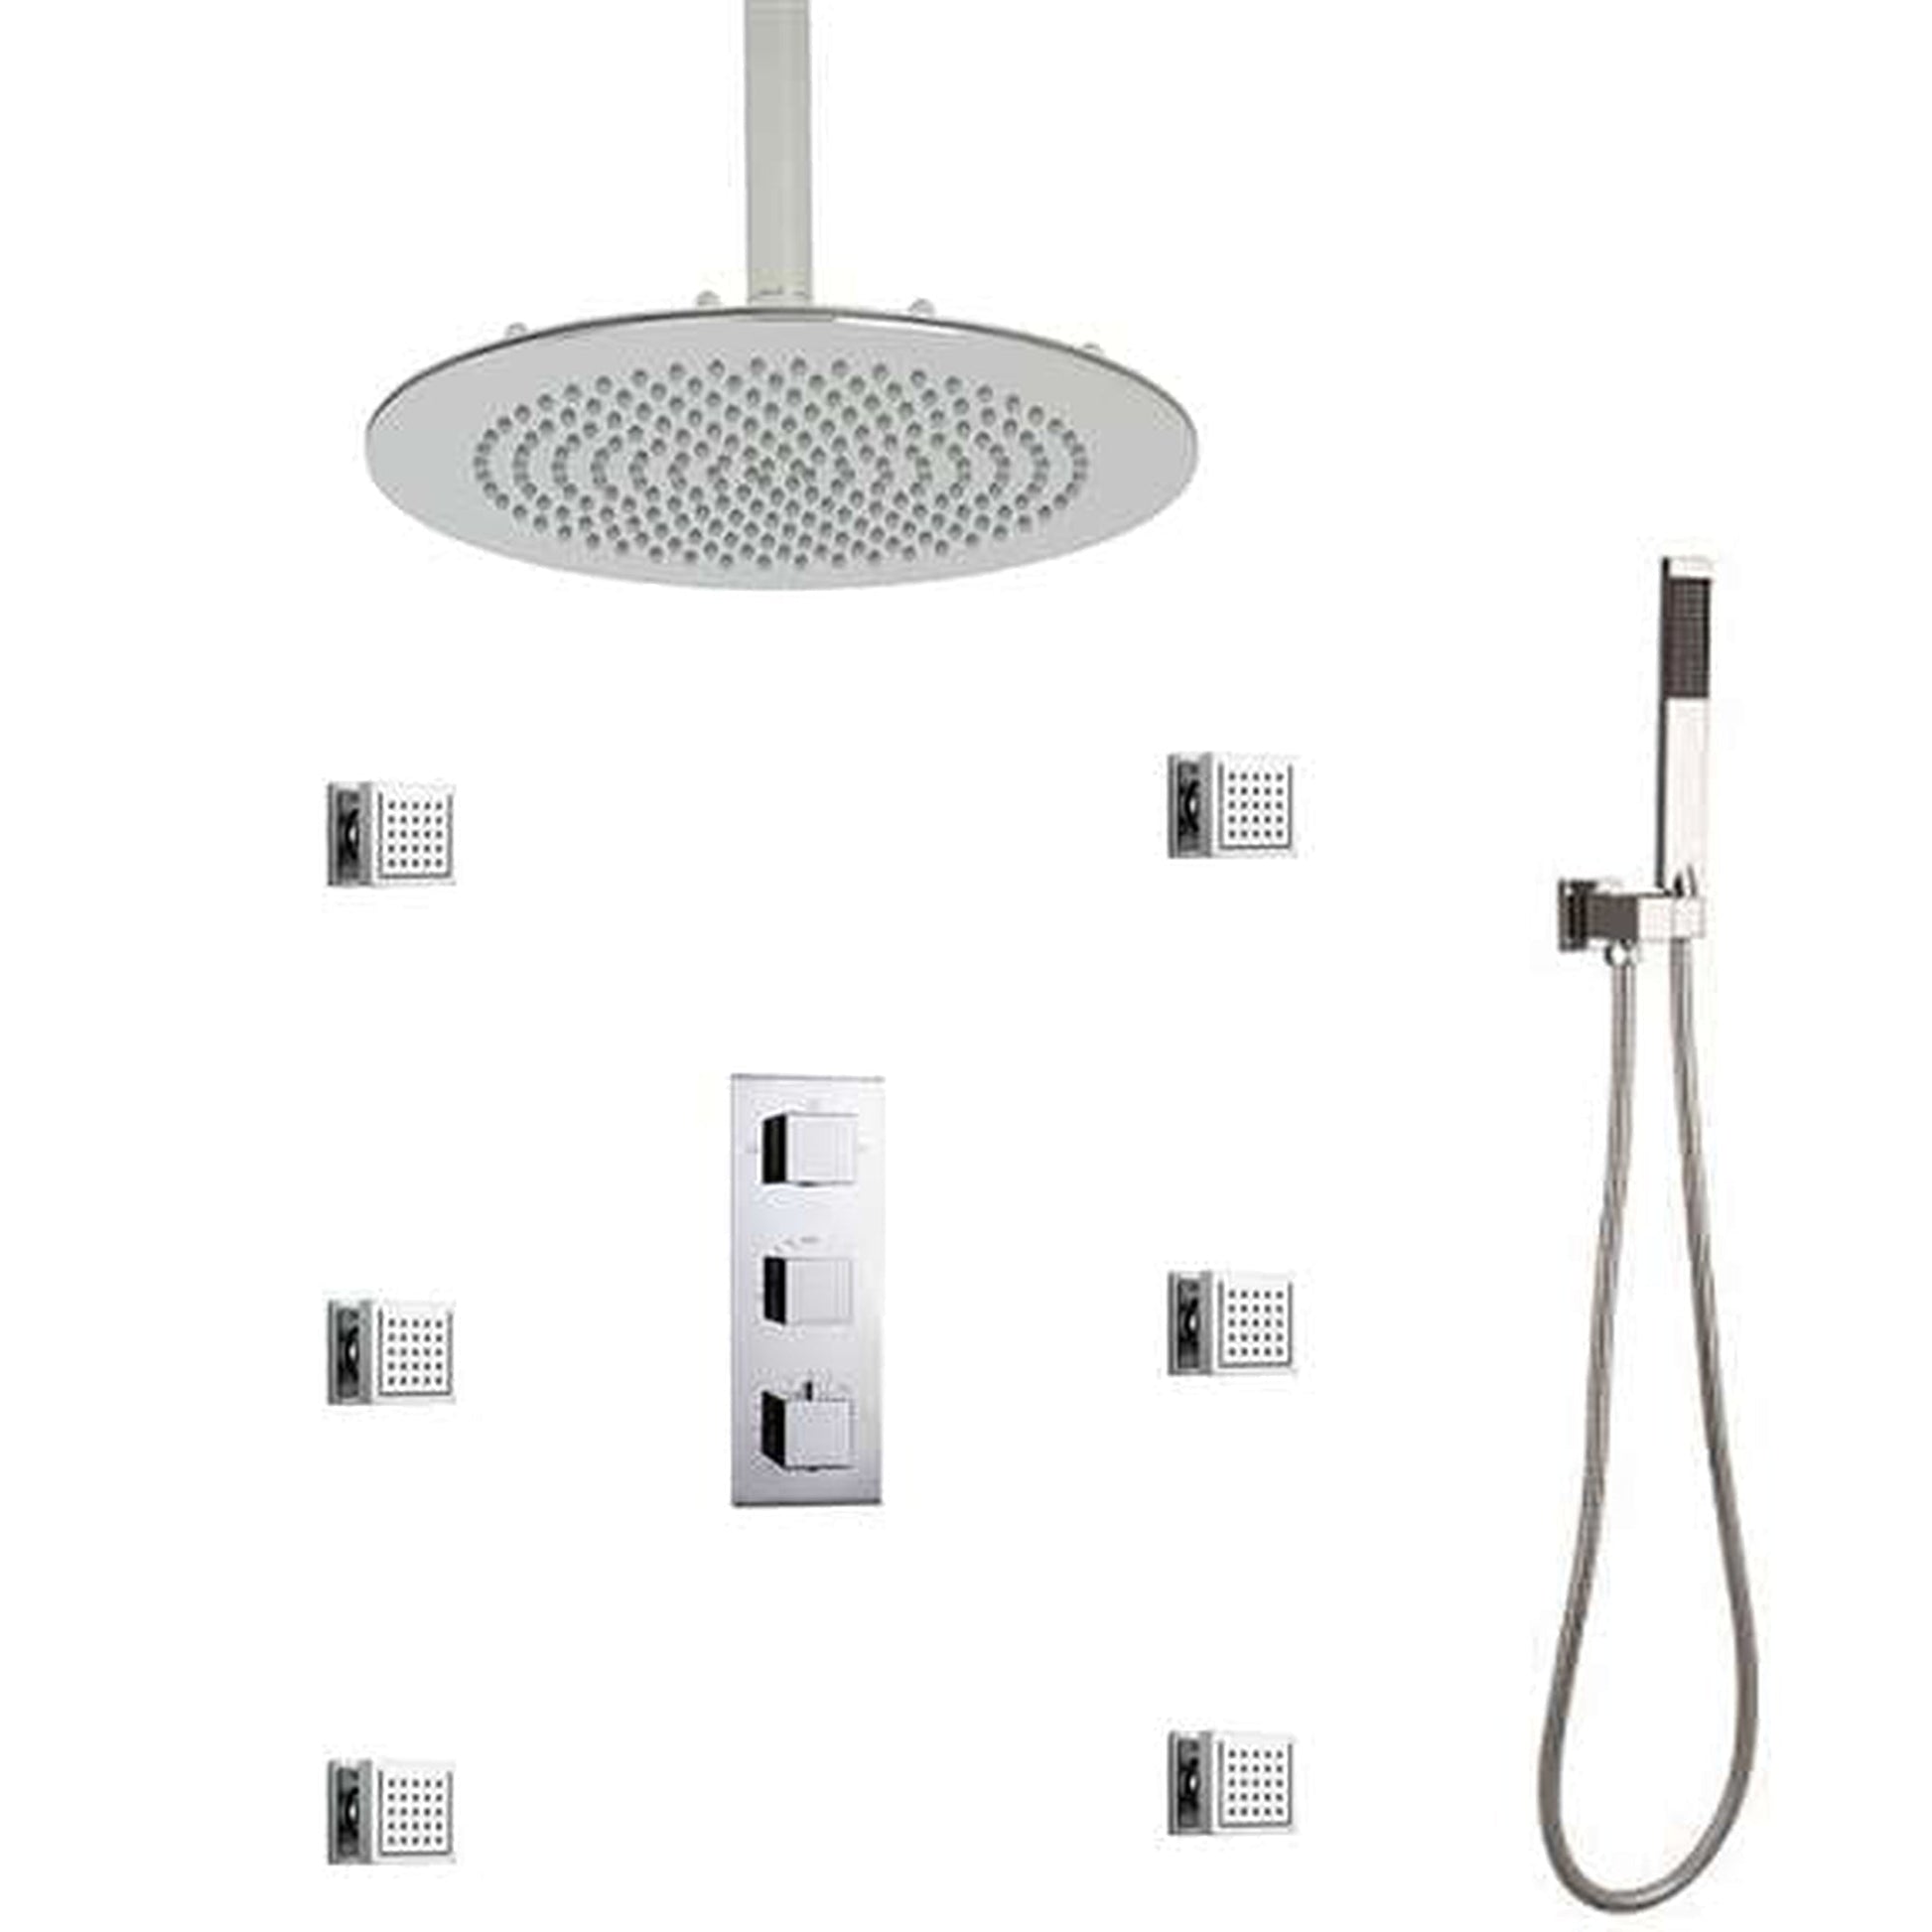 FontanaShowers Atlantic Creative Luxury 24" Large Chrome Round Ceiling Mounted Shower System Without Water Powered LED Lights, 6-Jet Body Spray and Hand Shower